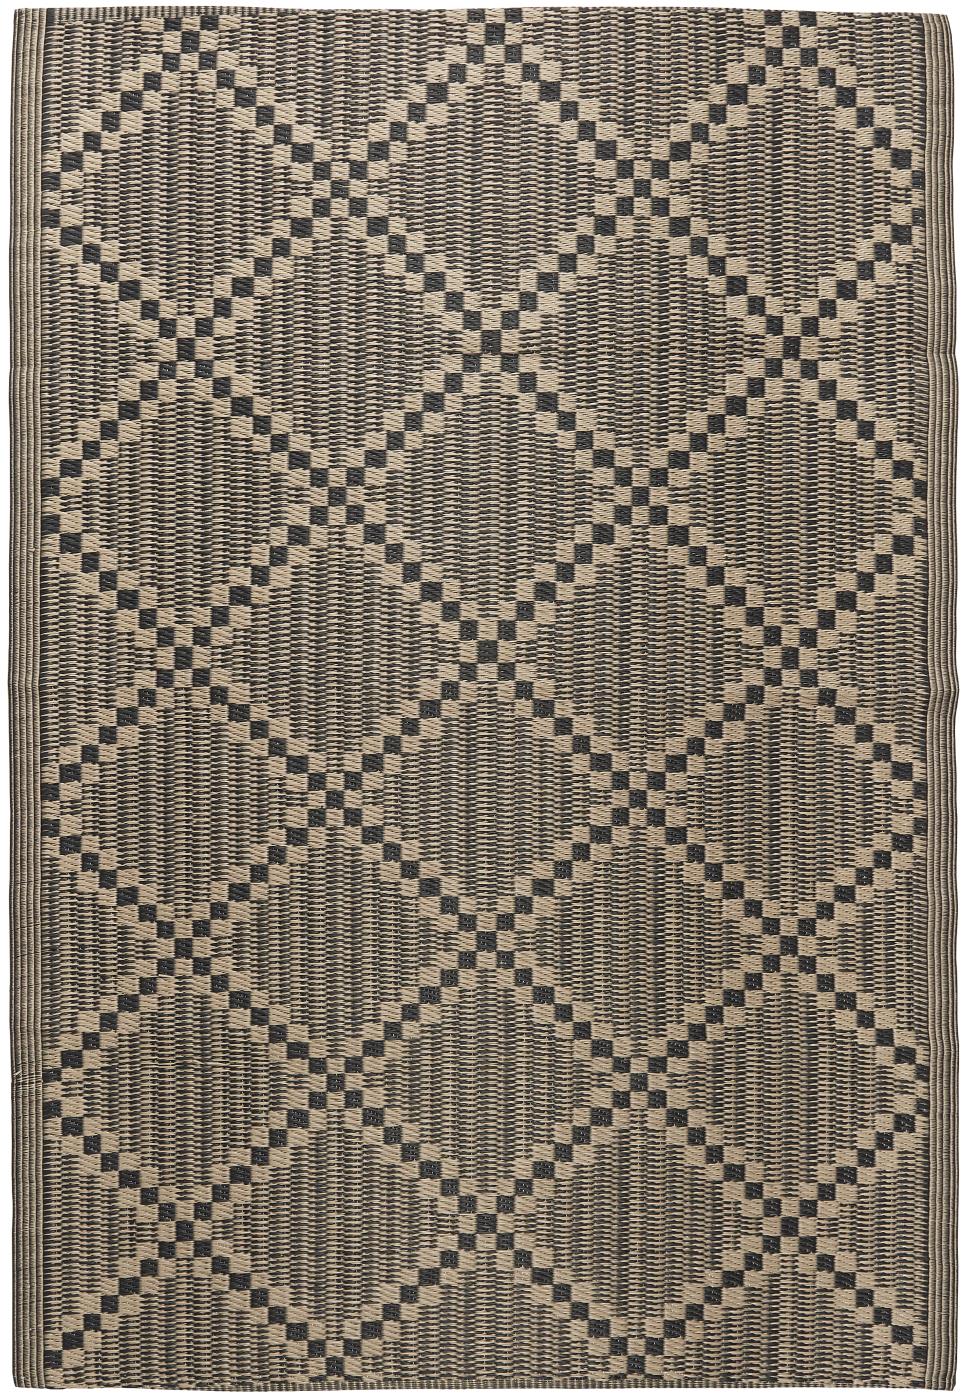 Black and beige recycled mat